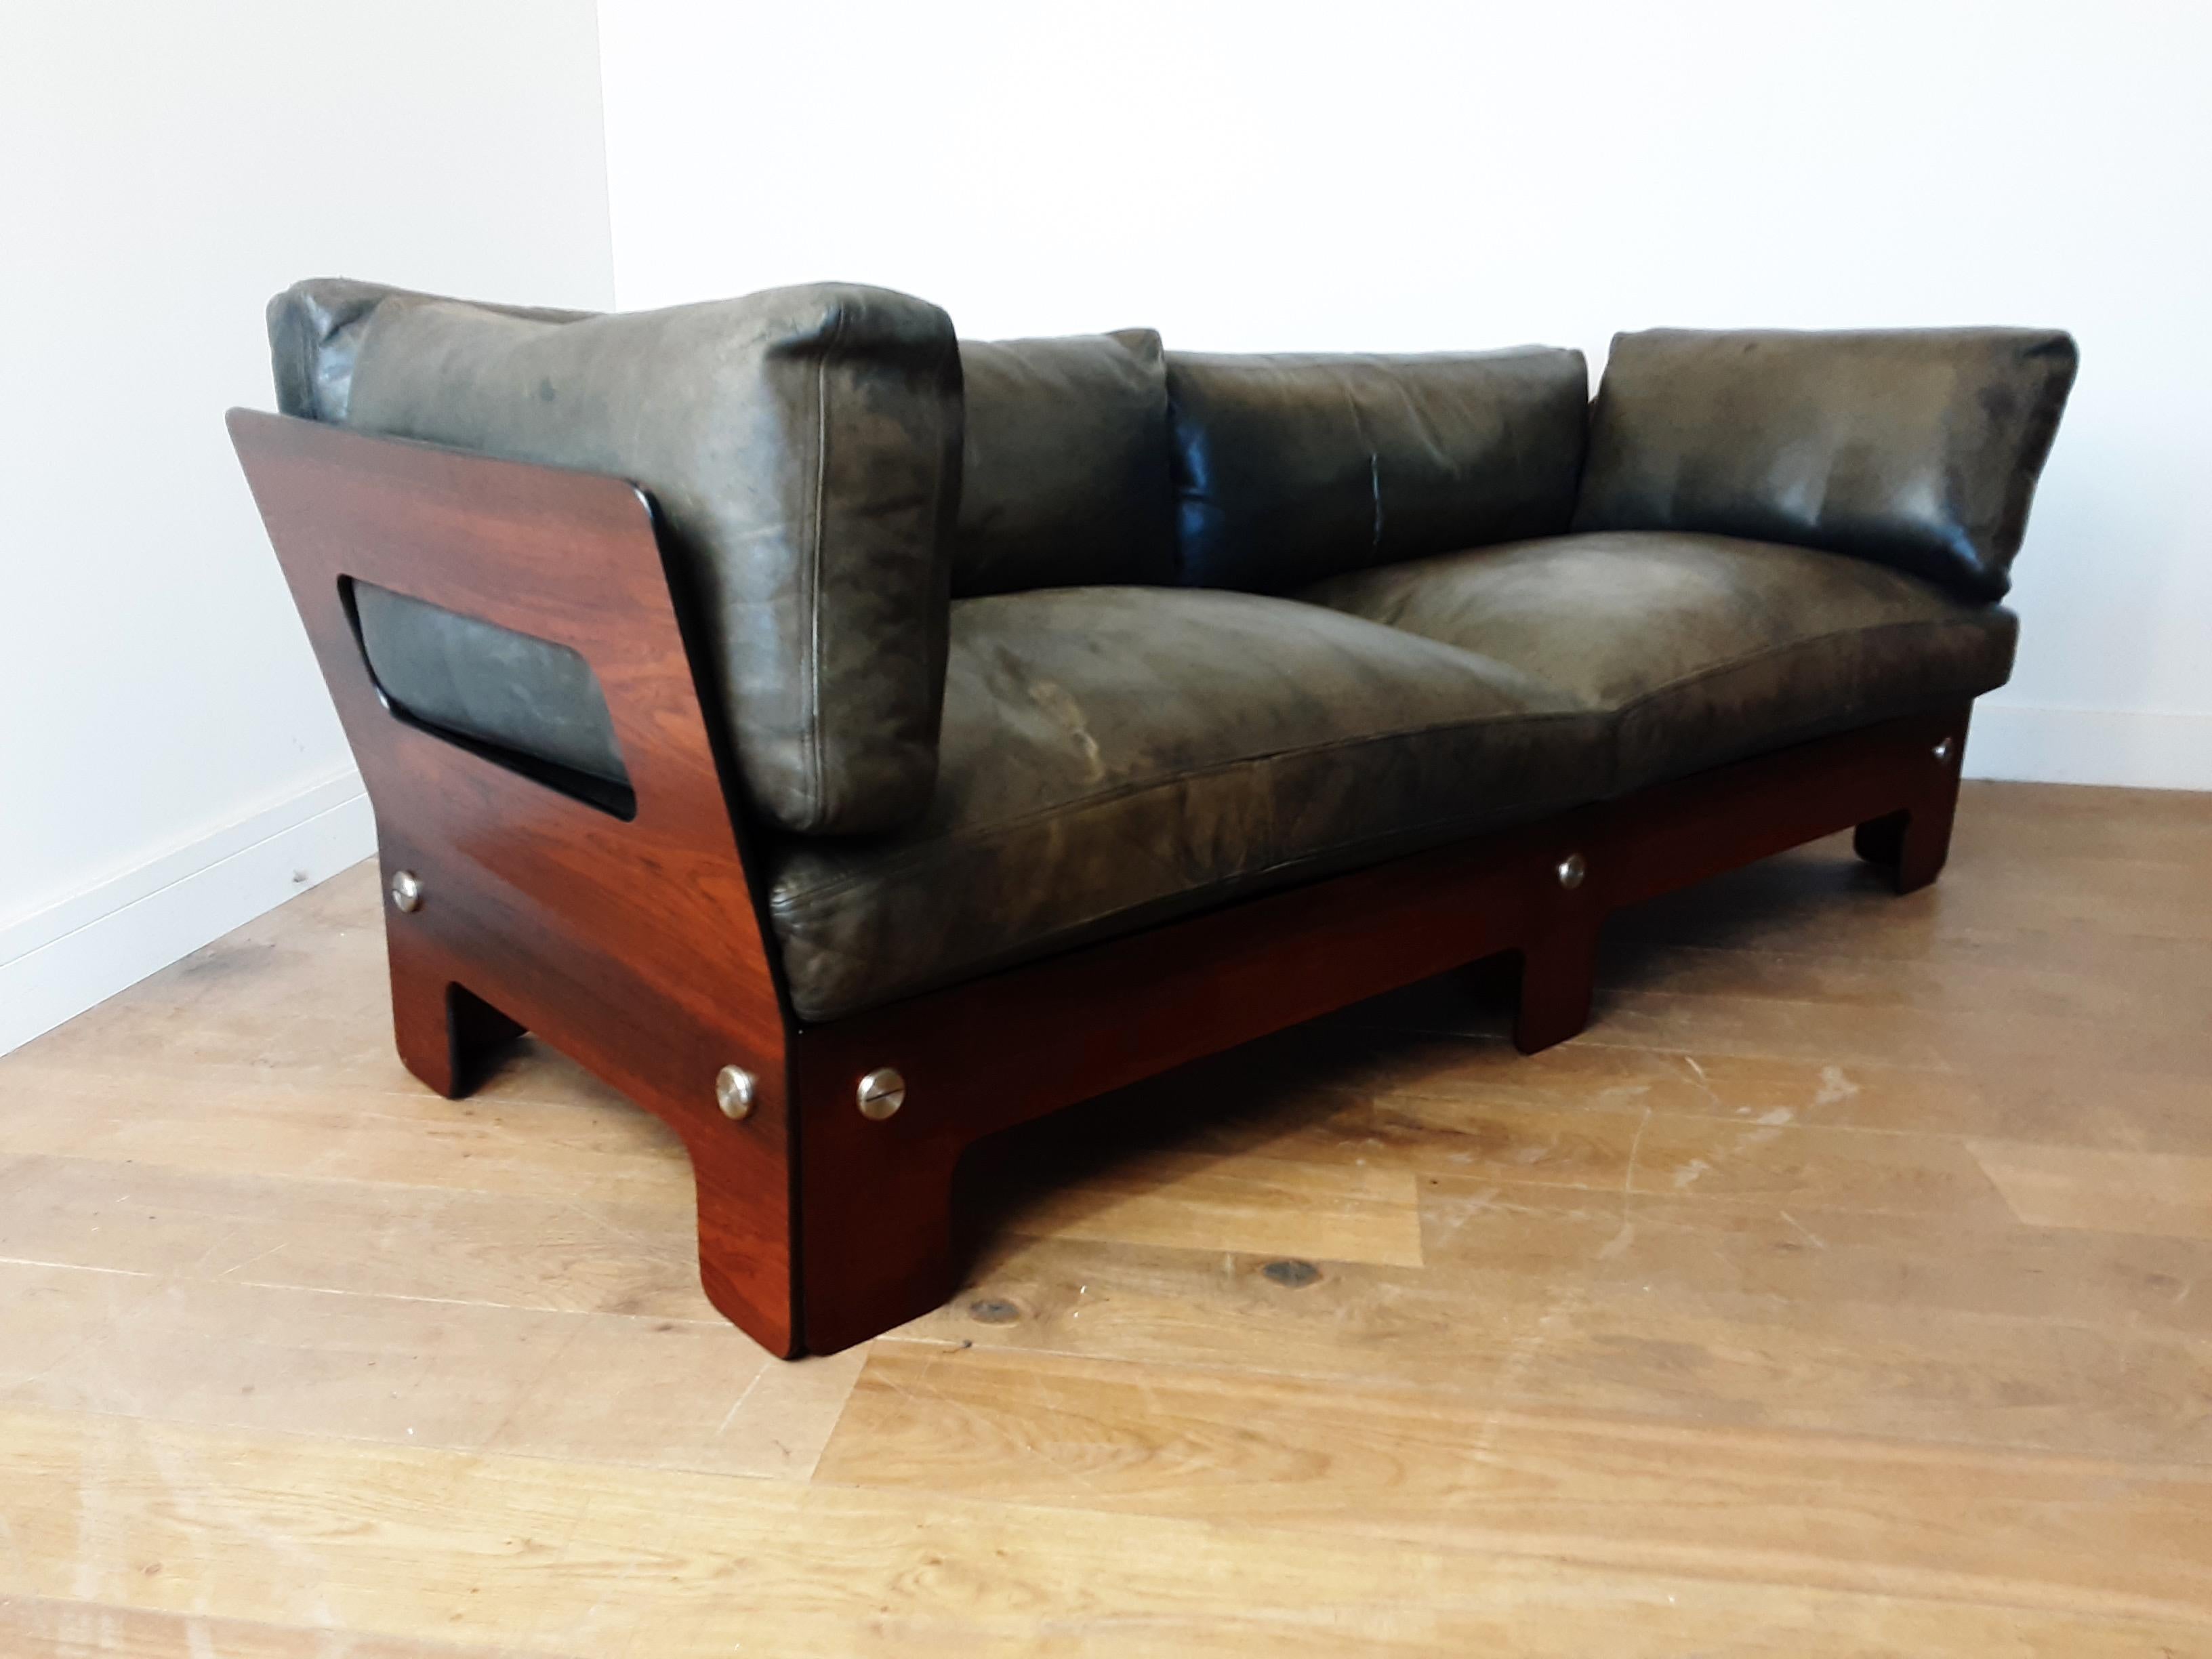 A stunning and rare sofa in rosewood and leather with Pirelli rubber seat supports, and chrome fixings, original leather cushions in good condition with a nice patina, designed by Sigurd Ressel for Vatne Møbler.
Exceptional quality combined with